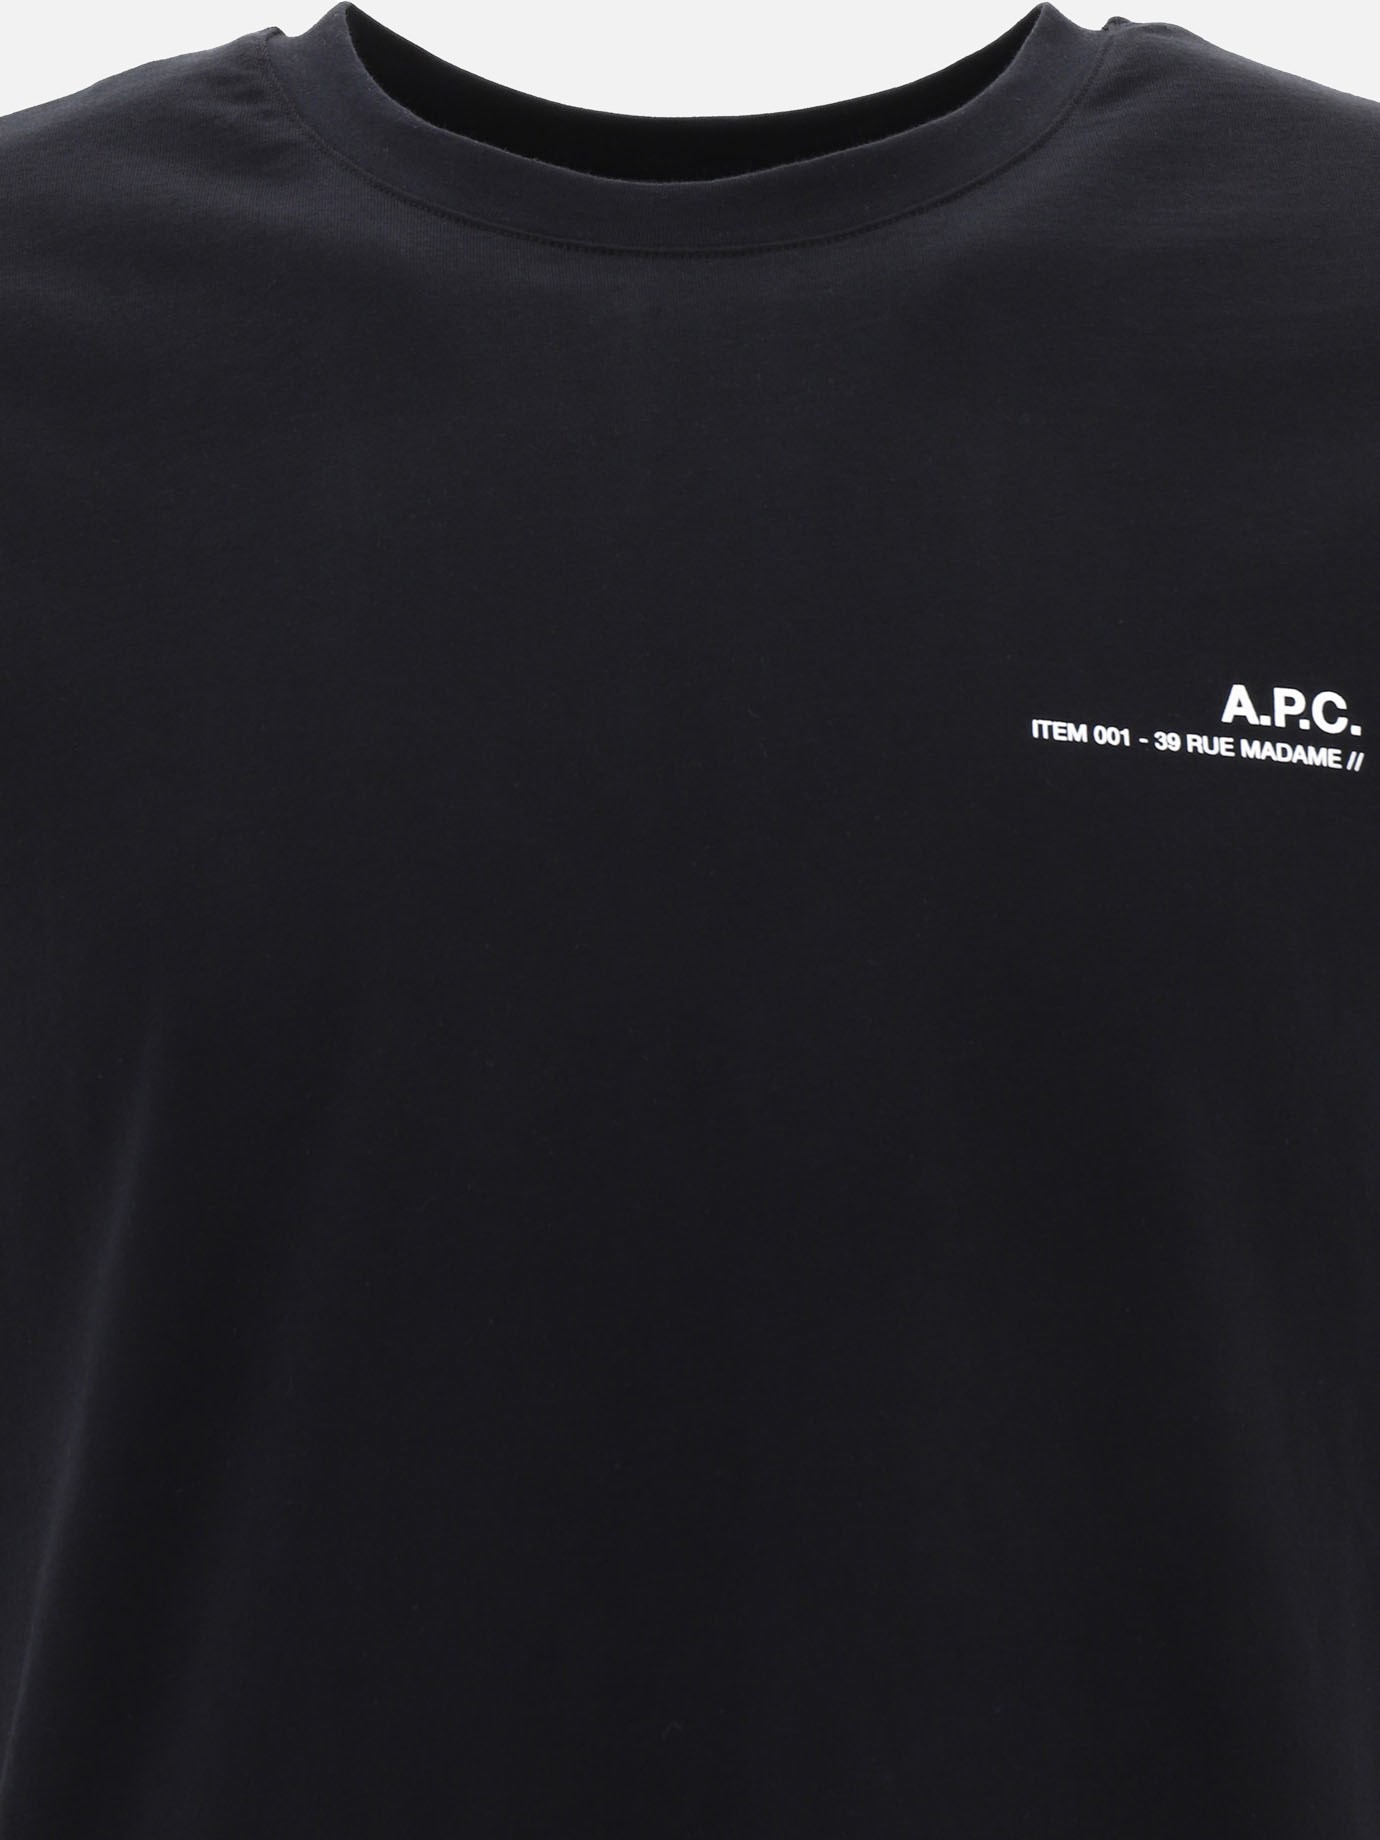  Item  t-shirt by A.P.C.